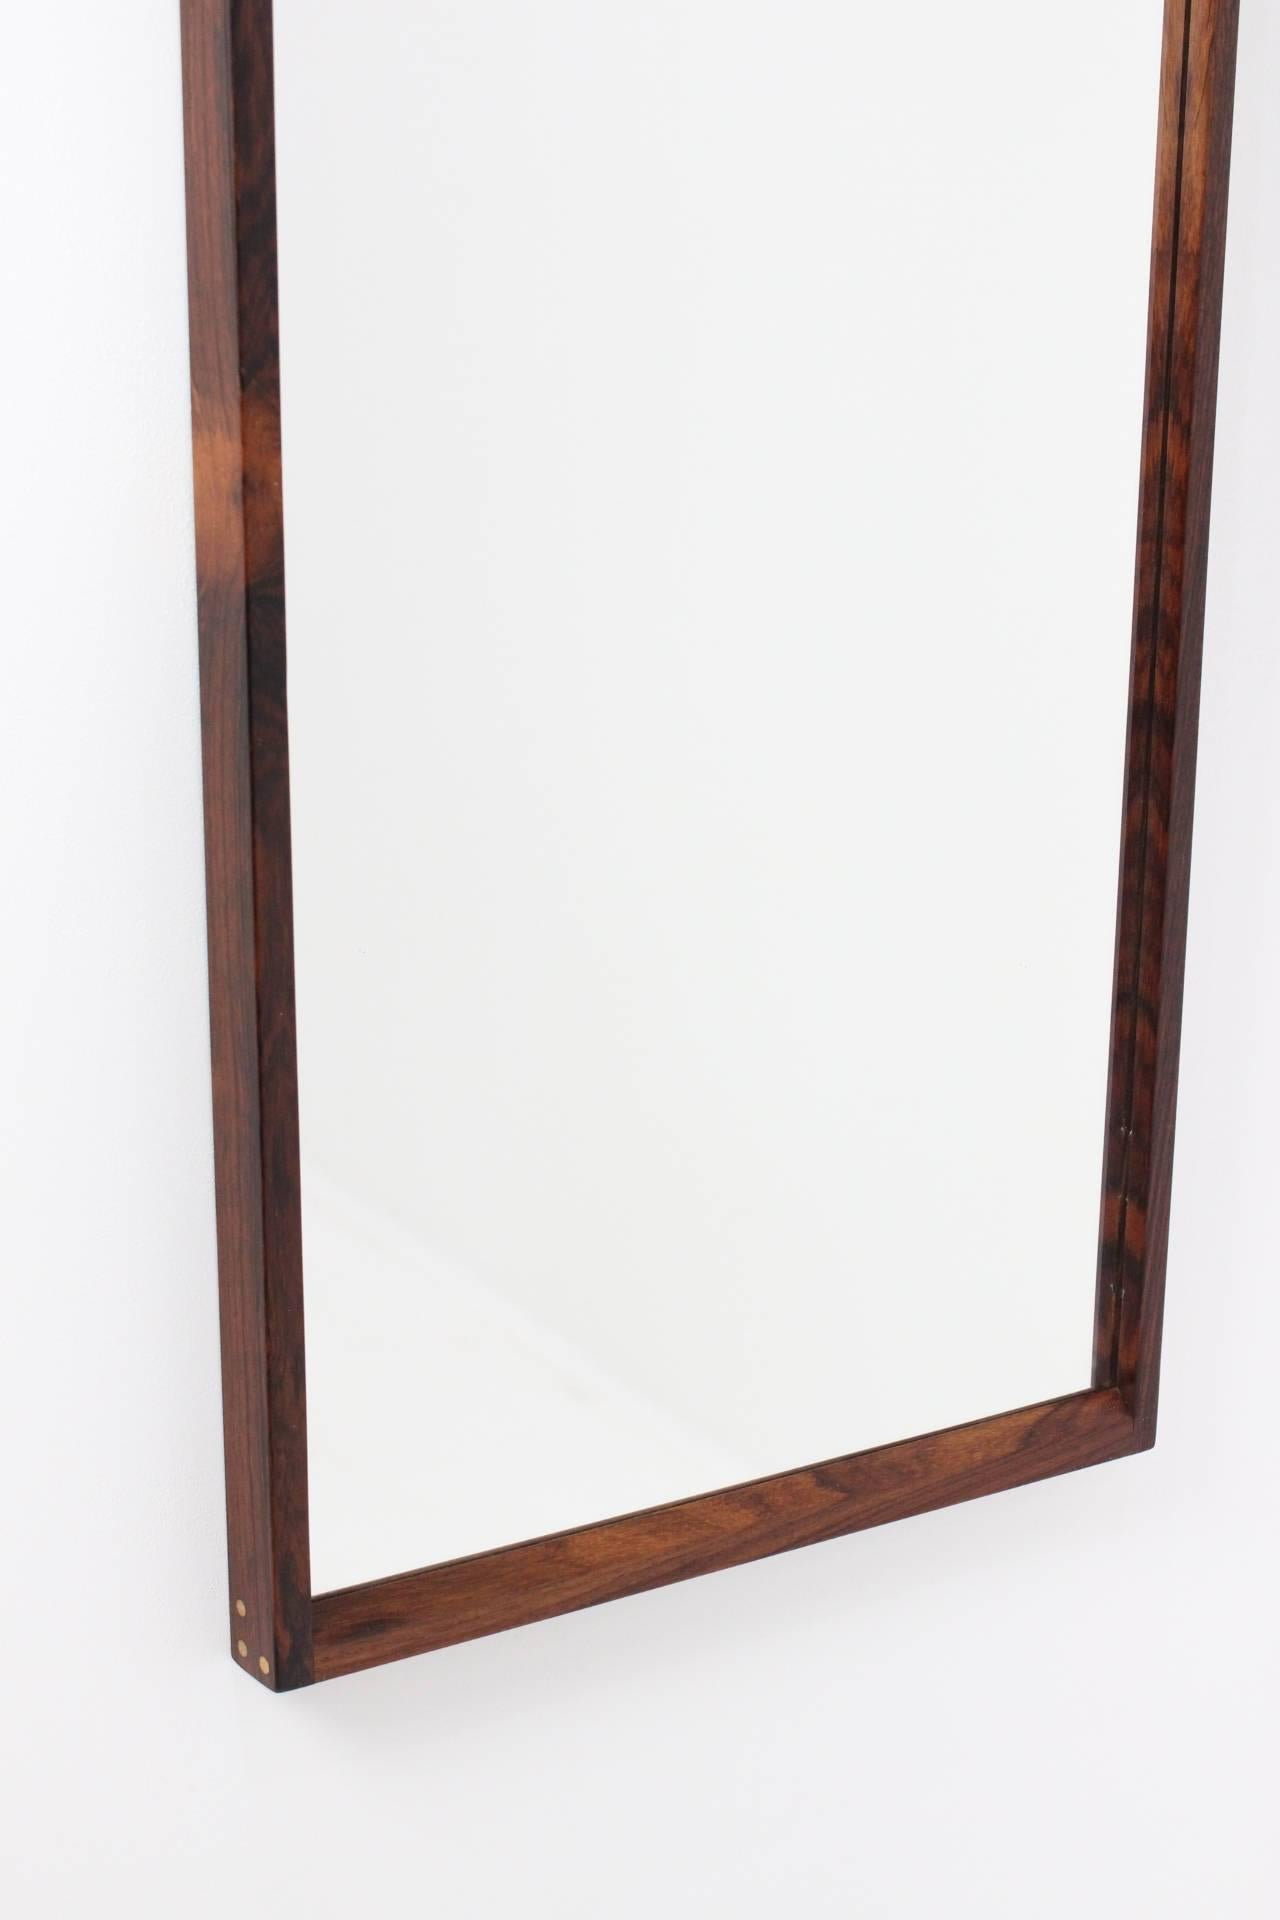 This mirror has craftsmanship and details, such as the visible wooden plugs on the edges. This item is in perfect original condition.